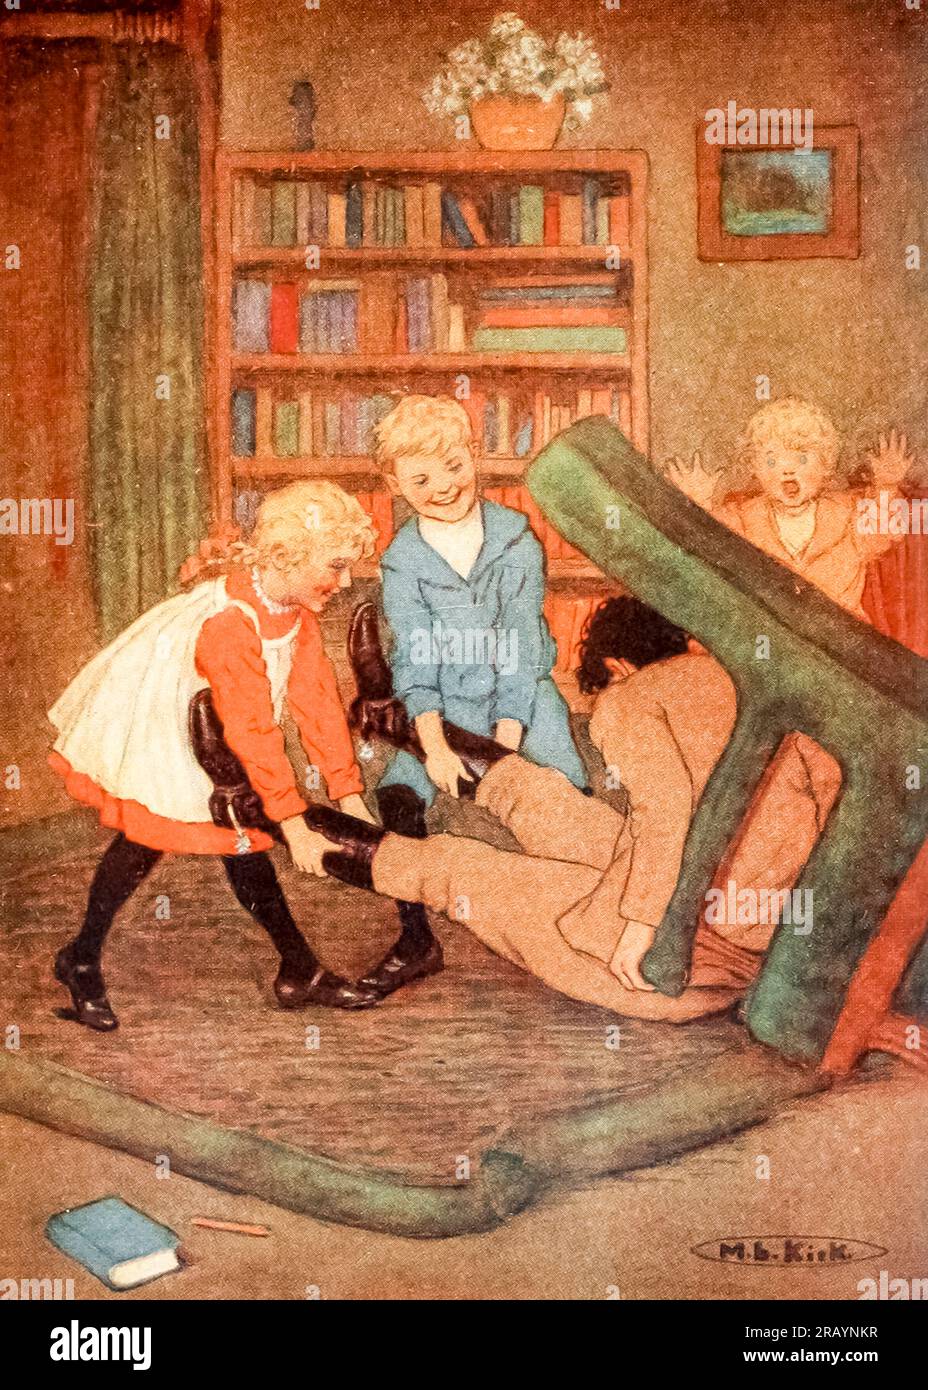 Before Jul could prevent it he was pulled off his chair. illustrated by Maria L. Kirk from the book ' Dora ' by Spyri, Johanna, 1827-1901 Publication date 1924 Publisher Philadelphia & London, J.B. Lippincott Johanna Louise Spyri (12 June 1827 – 7 July 1901) was a Swiss author of novels, notably children's stories. She wrote the popular book Heidi. Born in Hirzel, a rural area in the canton of Zürich, as a child she spent several summers near Chur in Graubünden, the setting she later would use in her novels. Stock Photo